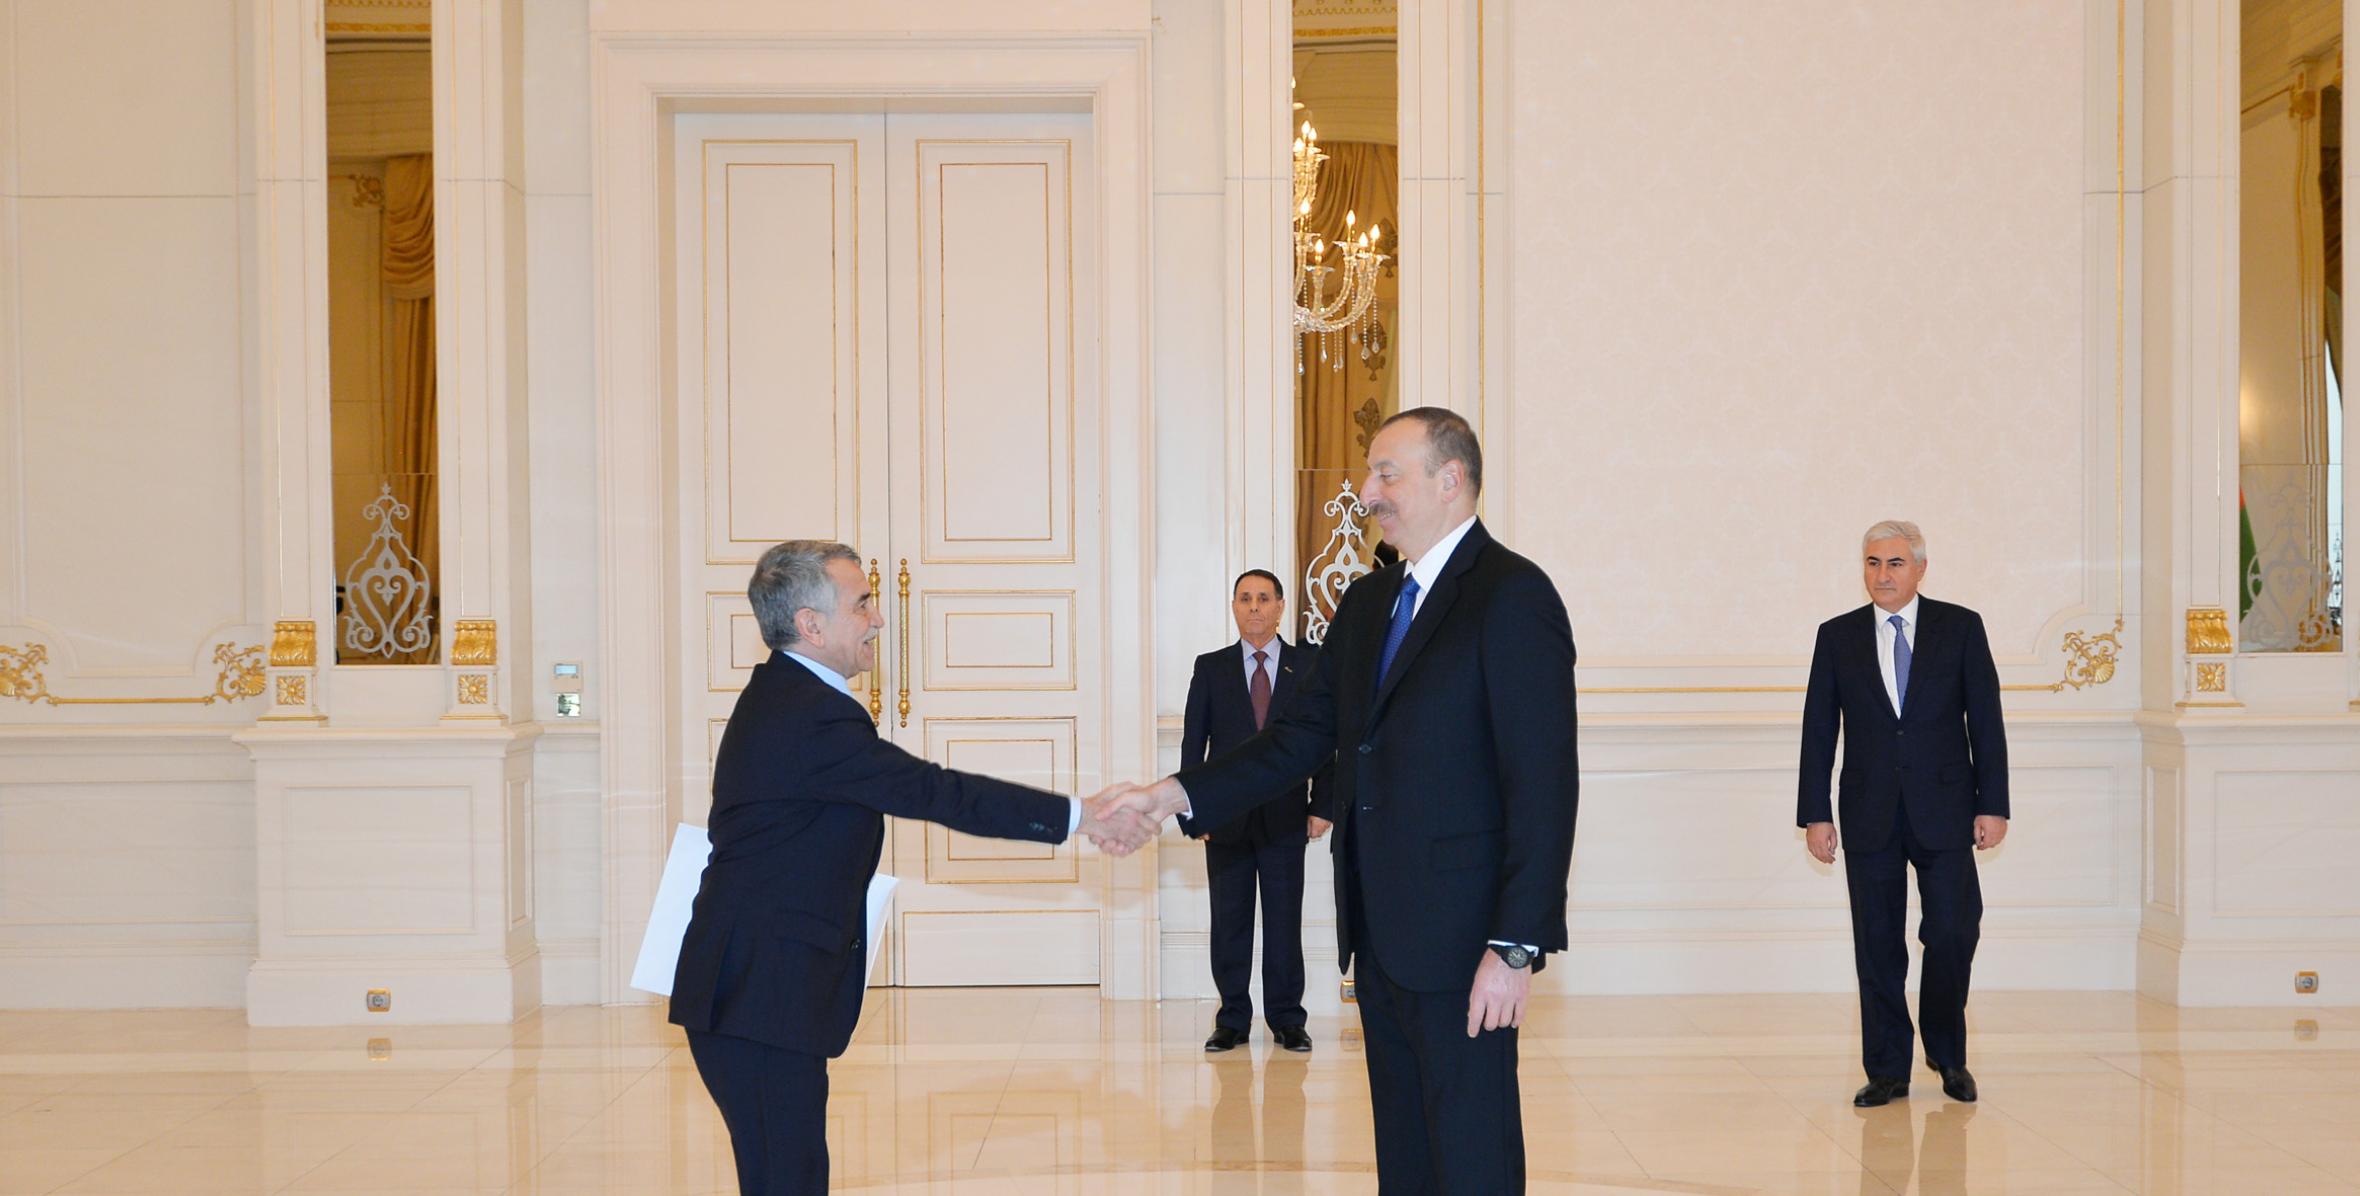 Ilham Aliyev received the credentials of the newly appointed Algerian Ambassador